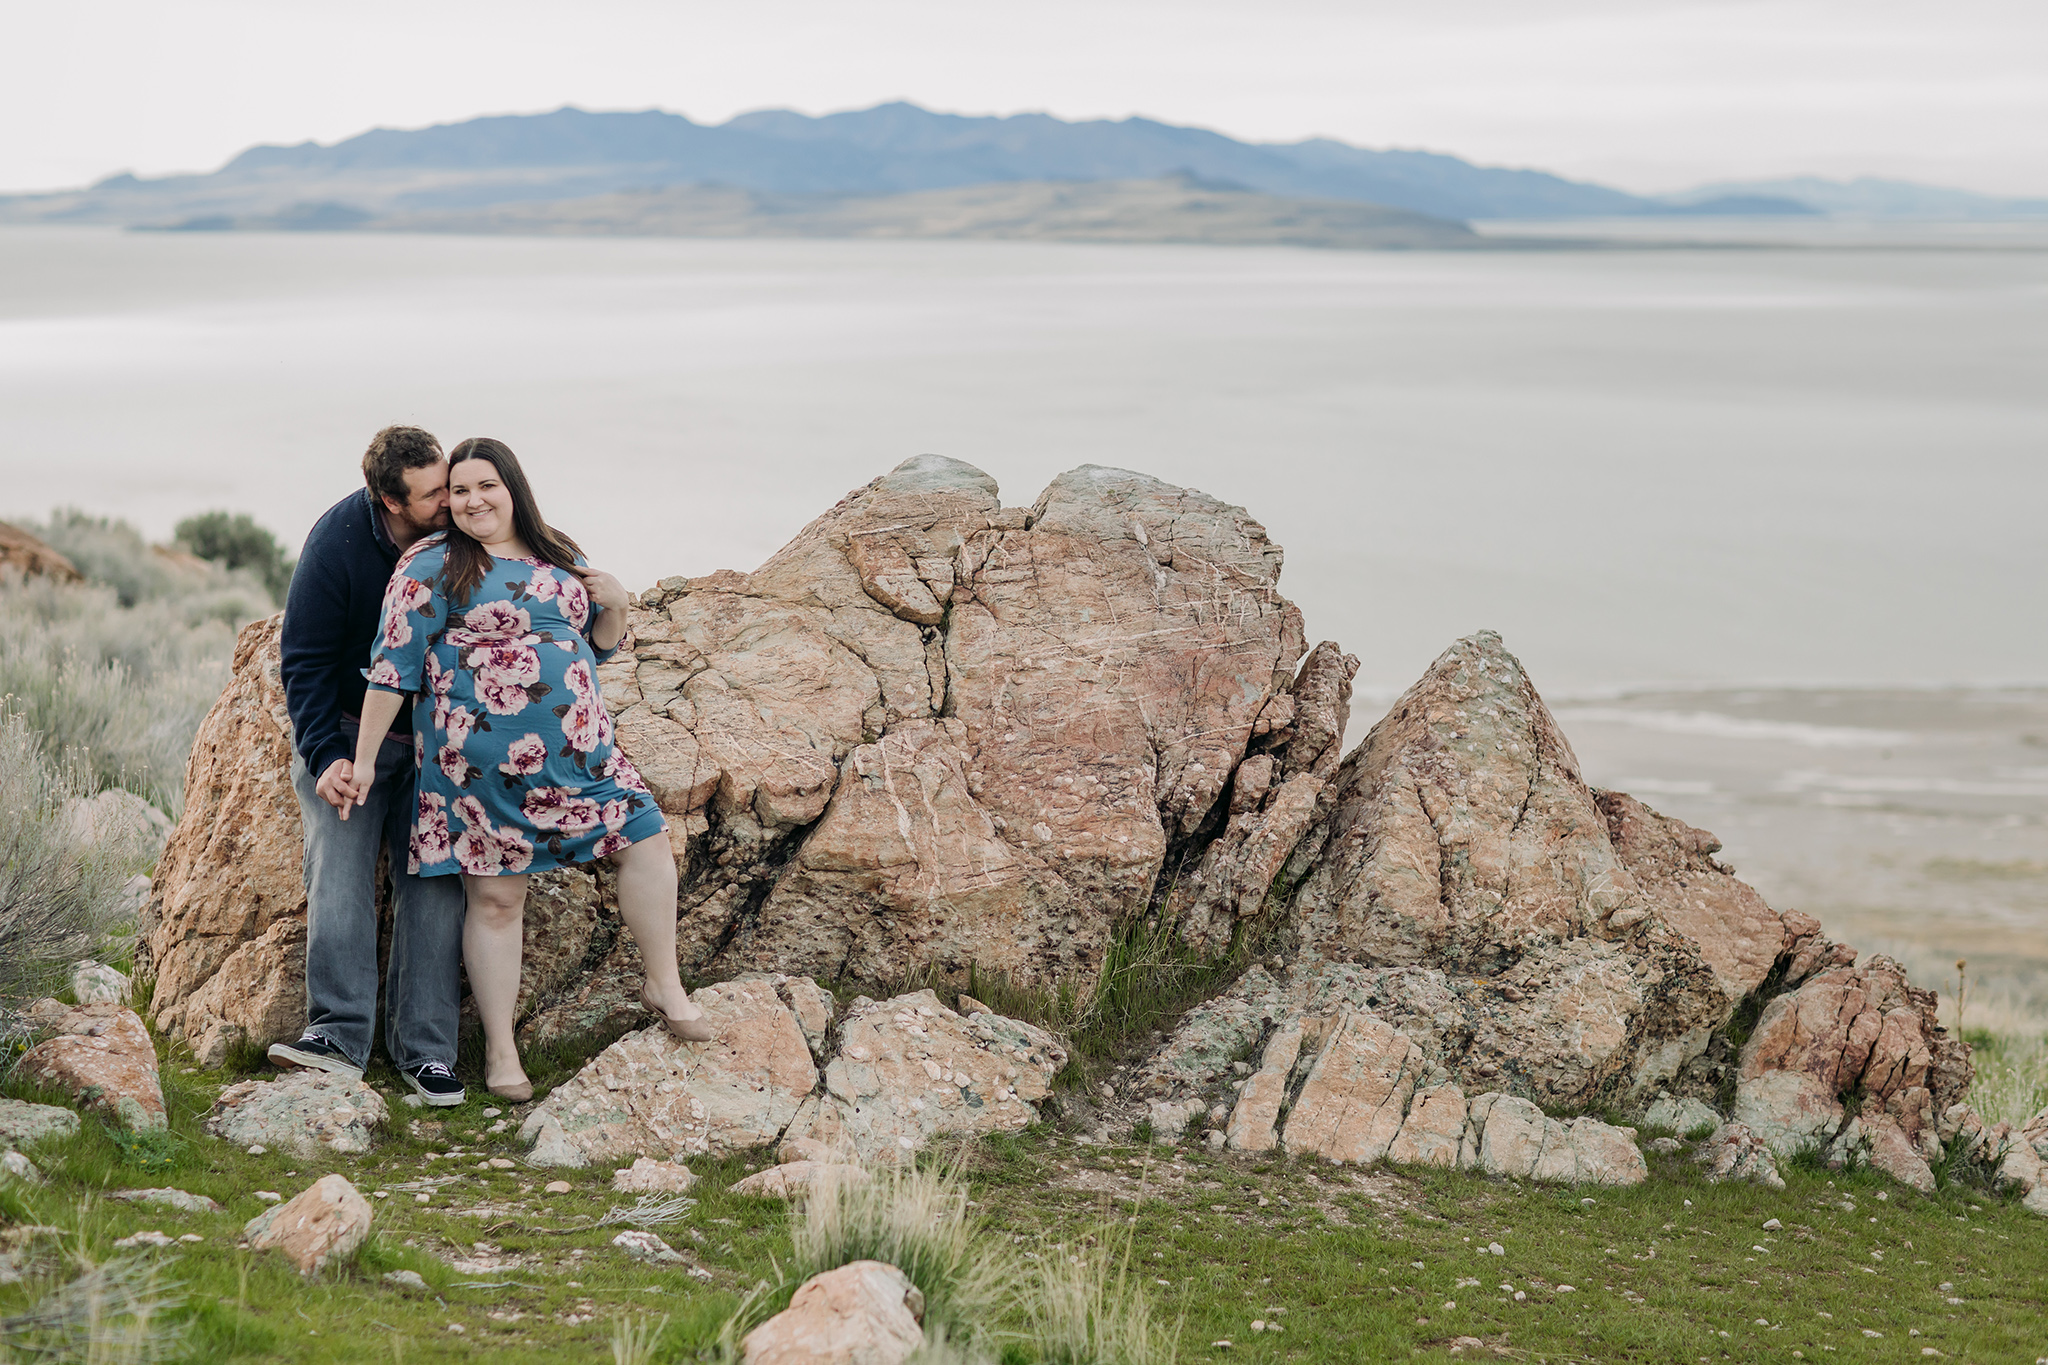 Breathtaking Buffalo Point Utah couples portraits in Spring. Exploring Utah with ENV Photography.